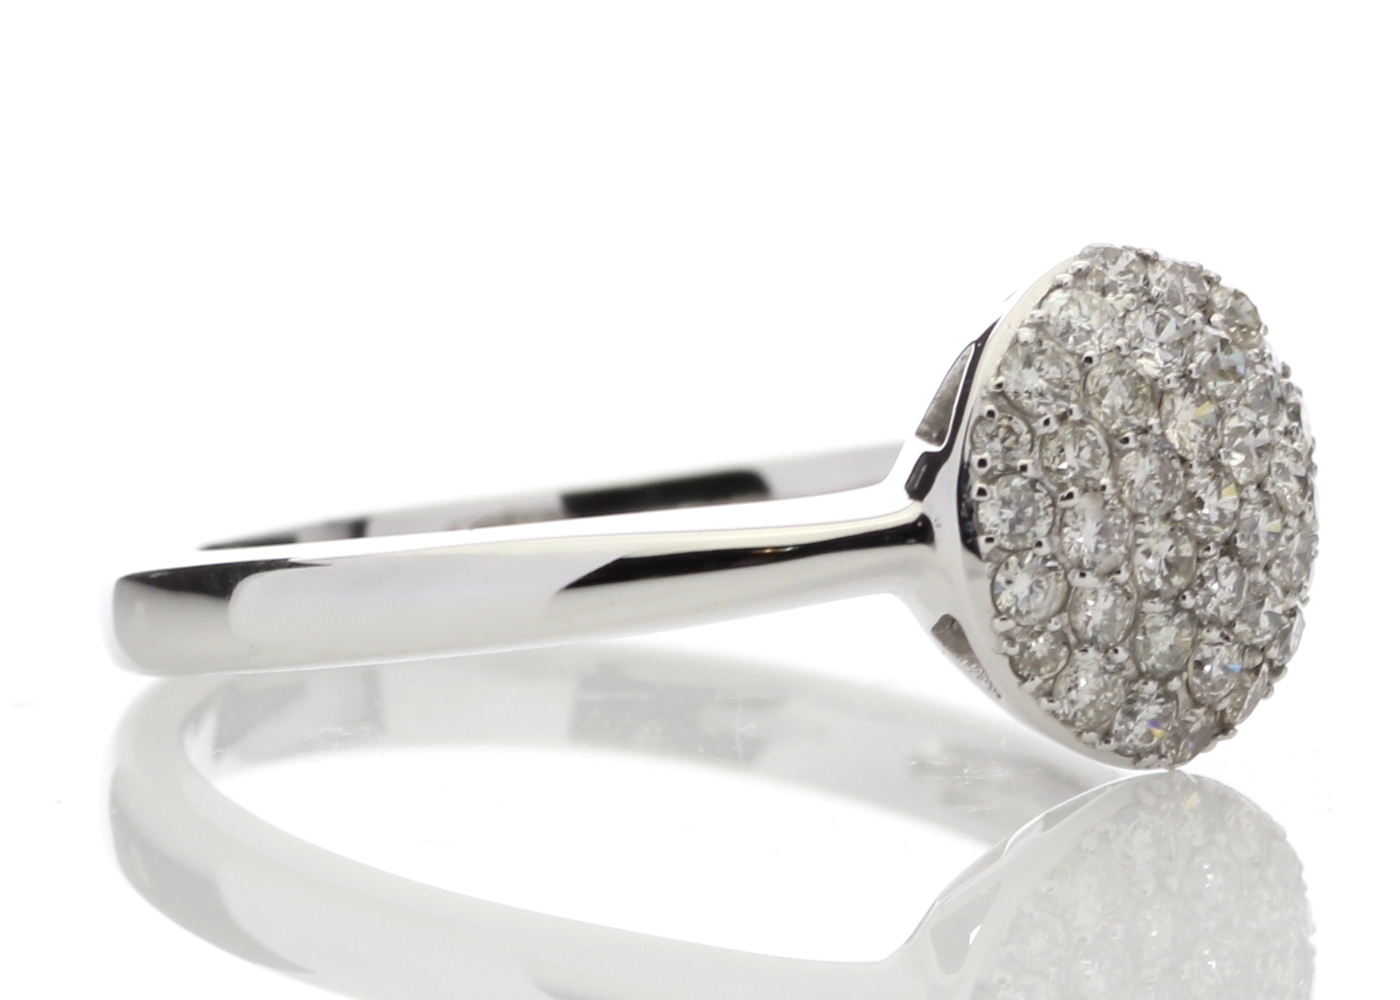 9k White Gold Diamond Cluster Ring 0.51 Carats - Image 4 of 4